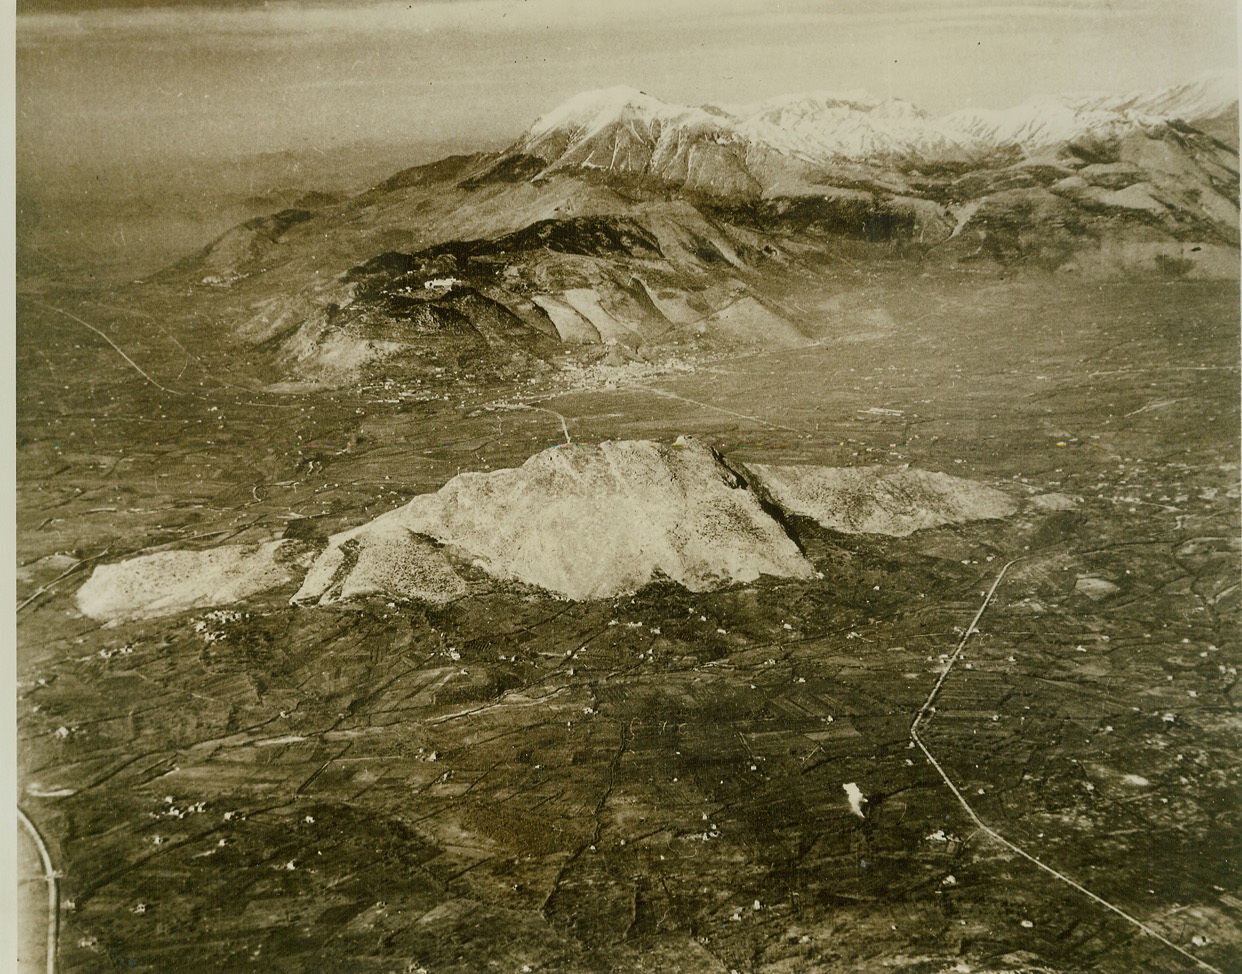 War-Torn Valley on Road to Rome, 2/6/1944. Italy – A photo from an Allied observation plane, looking north over the Cassino Battlefield, gives a bird’s-eye view of the embattled valley on the road to Rome. The burst of smoke in the right foreground reveals an American gun position firing on Nazi installations in Cassino, the shell-torn town huddled at the foot of the mountain ridge in the background. With the capture of Mt. Trocchio (center) and Mt. Cairo, high peak in the background, Fifth Army fighters have three-quarters circled the enemy, the Abbey of Monte Cassino, perched in the mountain above Cassino (left of town), bristles with Nazi guns trying to thwart our drive to Rome. The Rapido River is at top right. Credit: (ACME);